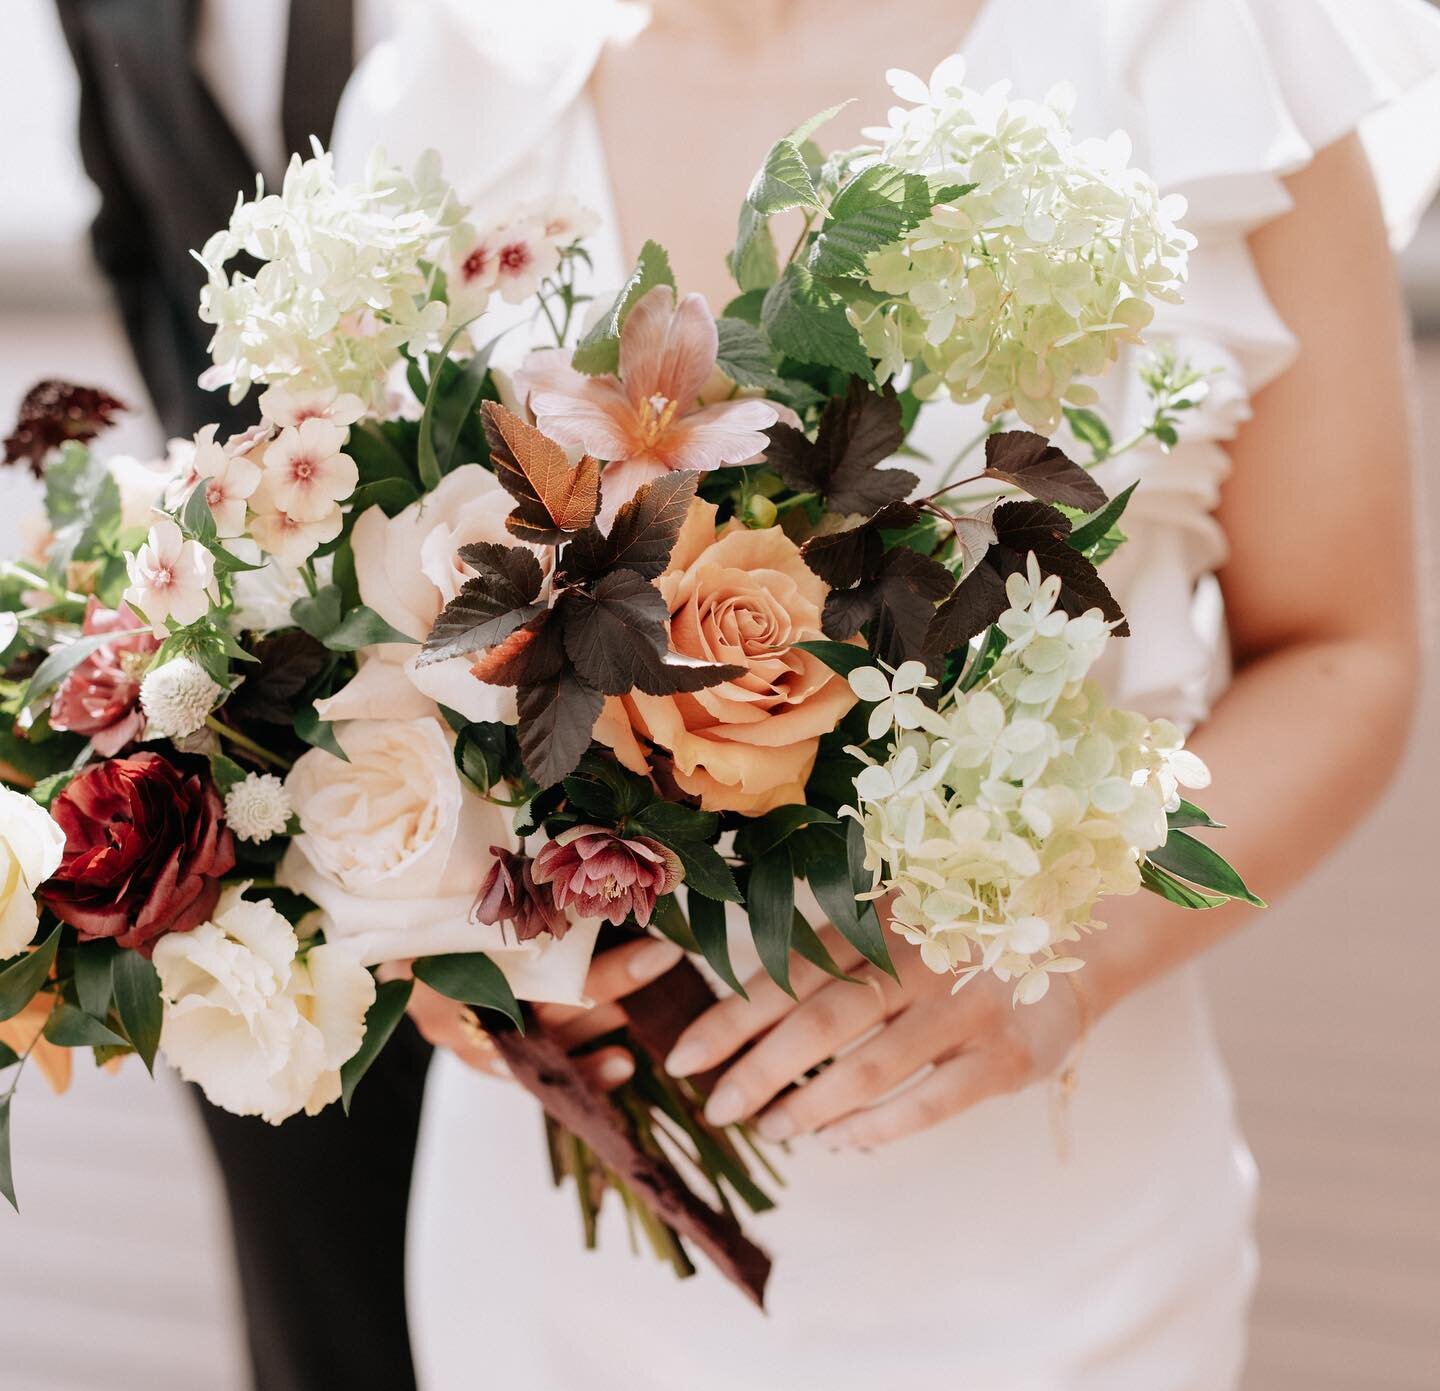 Happy September! Celebrating my 3rd wedding anni this weekend so here&rsquo;s a moment for my bridal bouquet 🤍 

I wanted it to be moody, but light and timeless; fall but summer (lol). Snuck in some locally grown cherry caramel phlox, limelight hydr